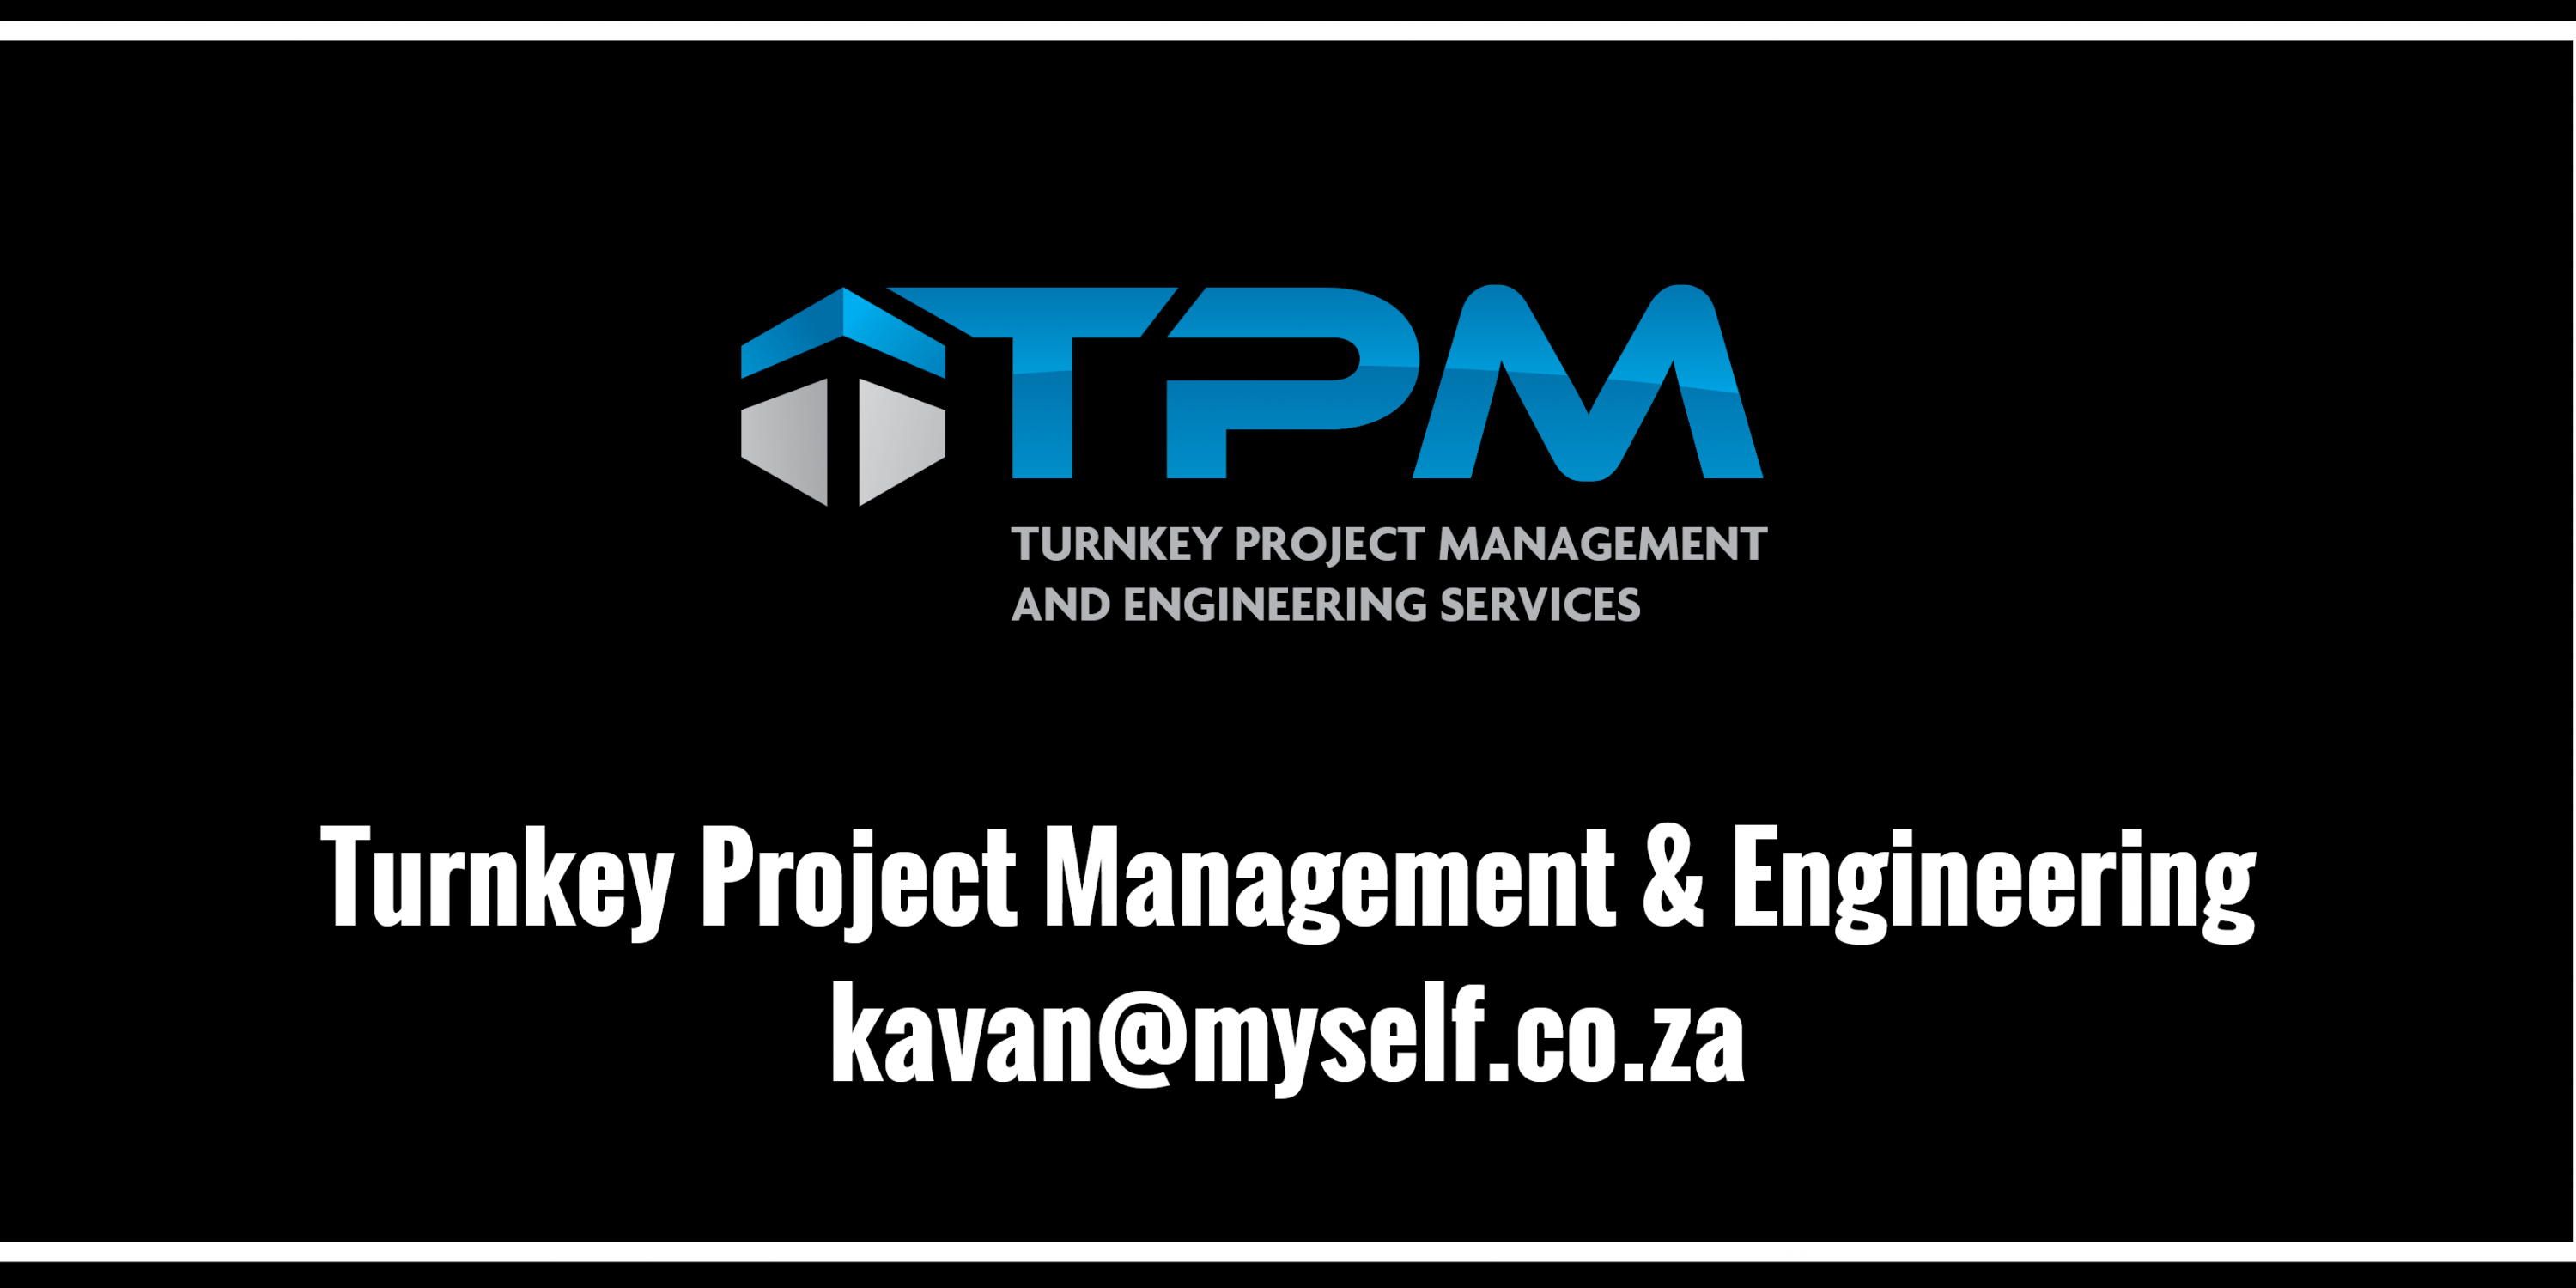 Turnkey Project Management & Engineering